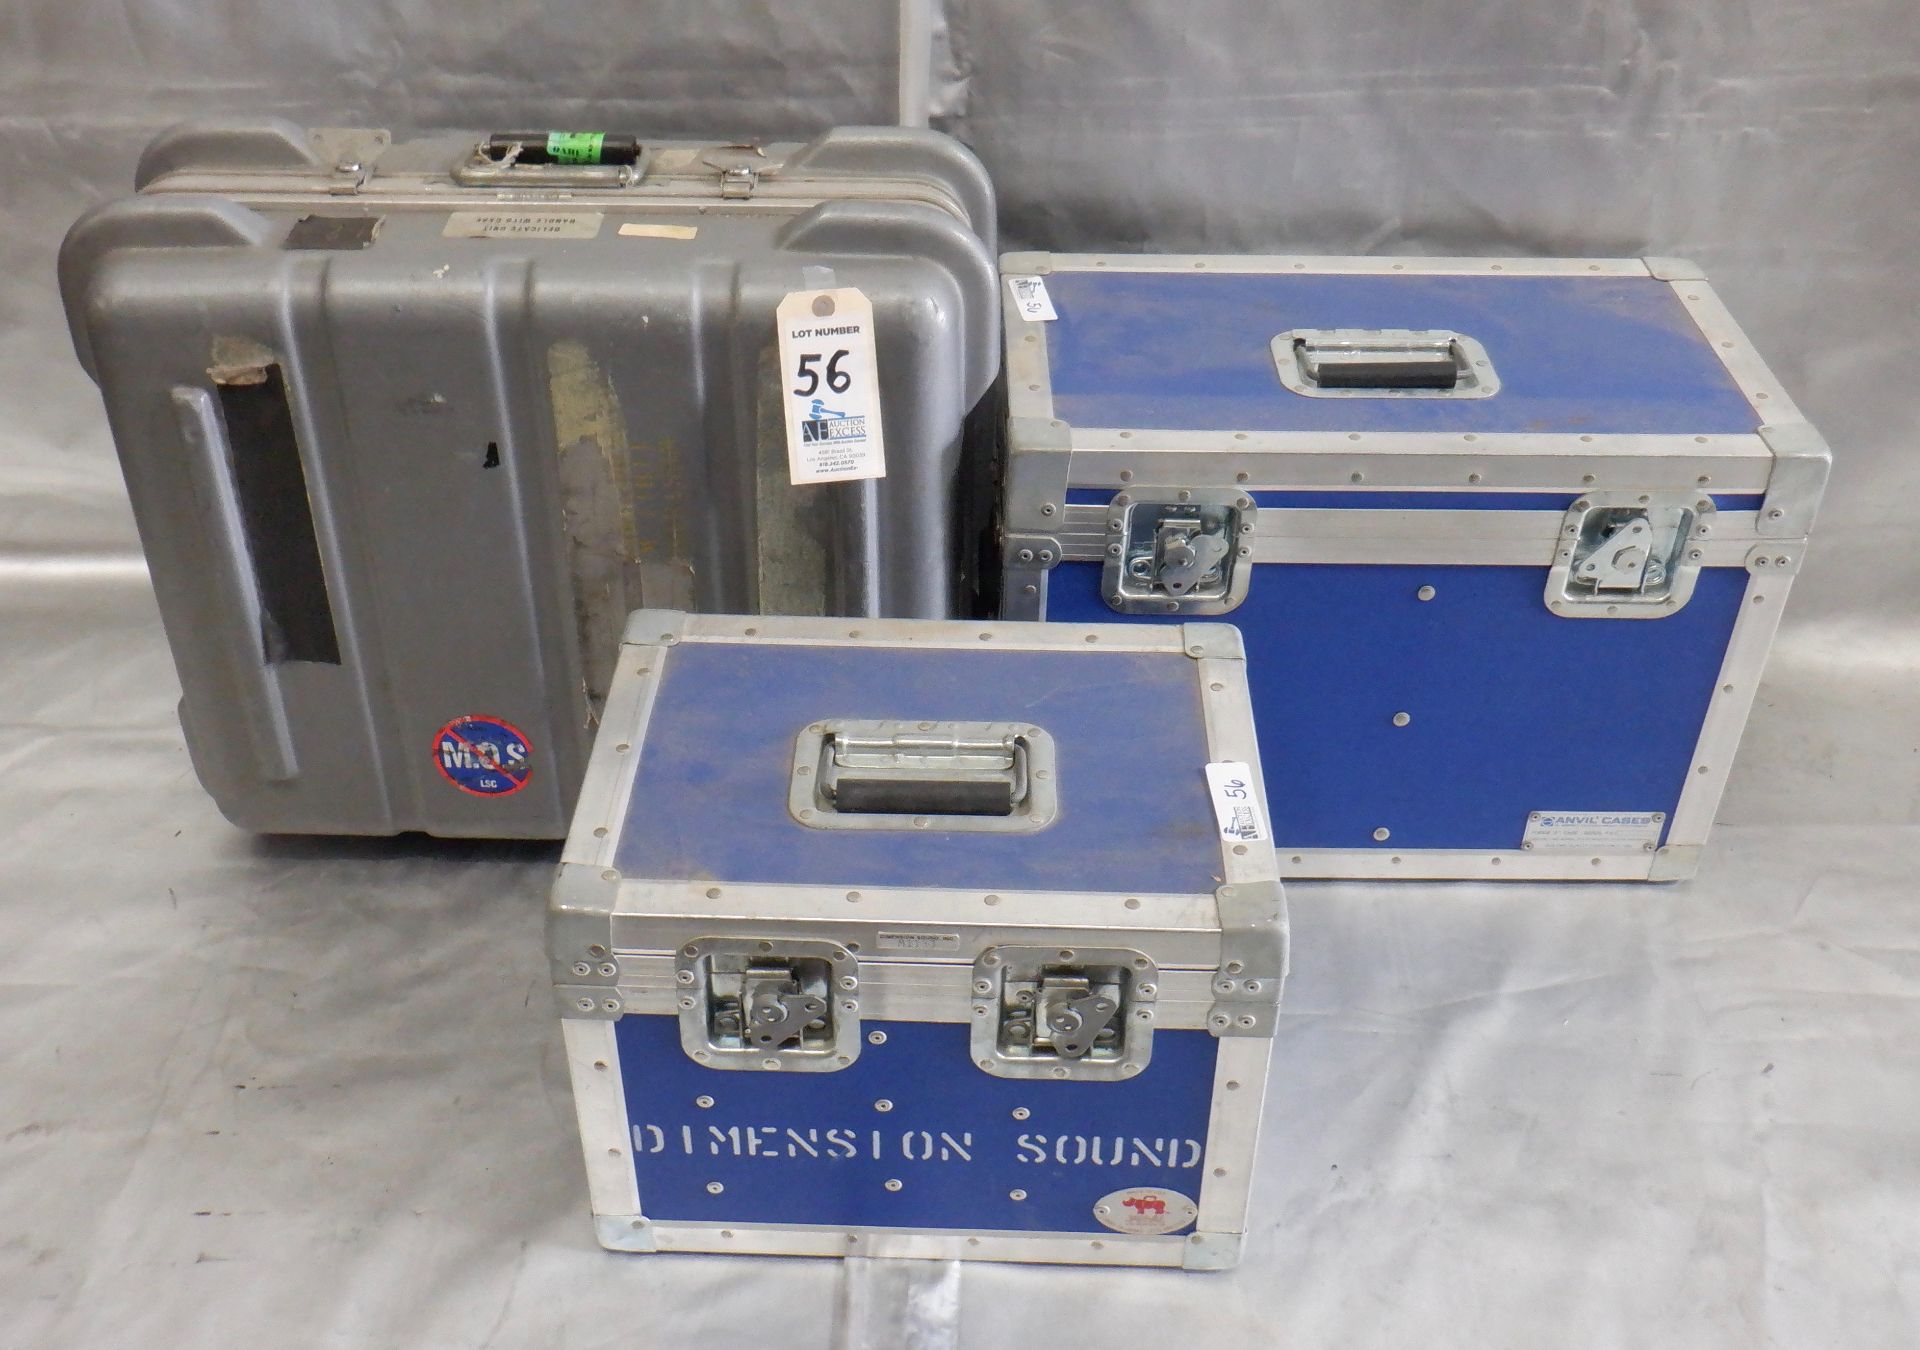 LOT OF 3 ROAD CASES